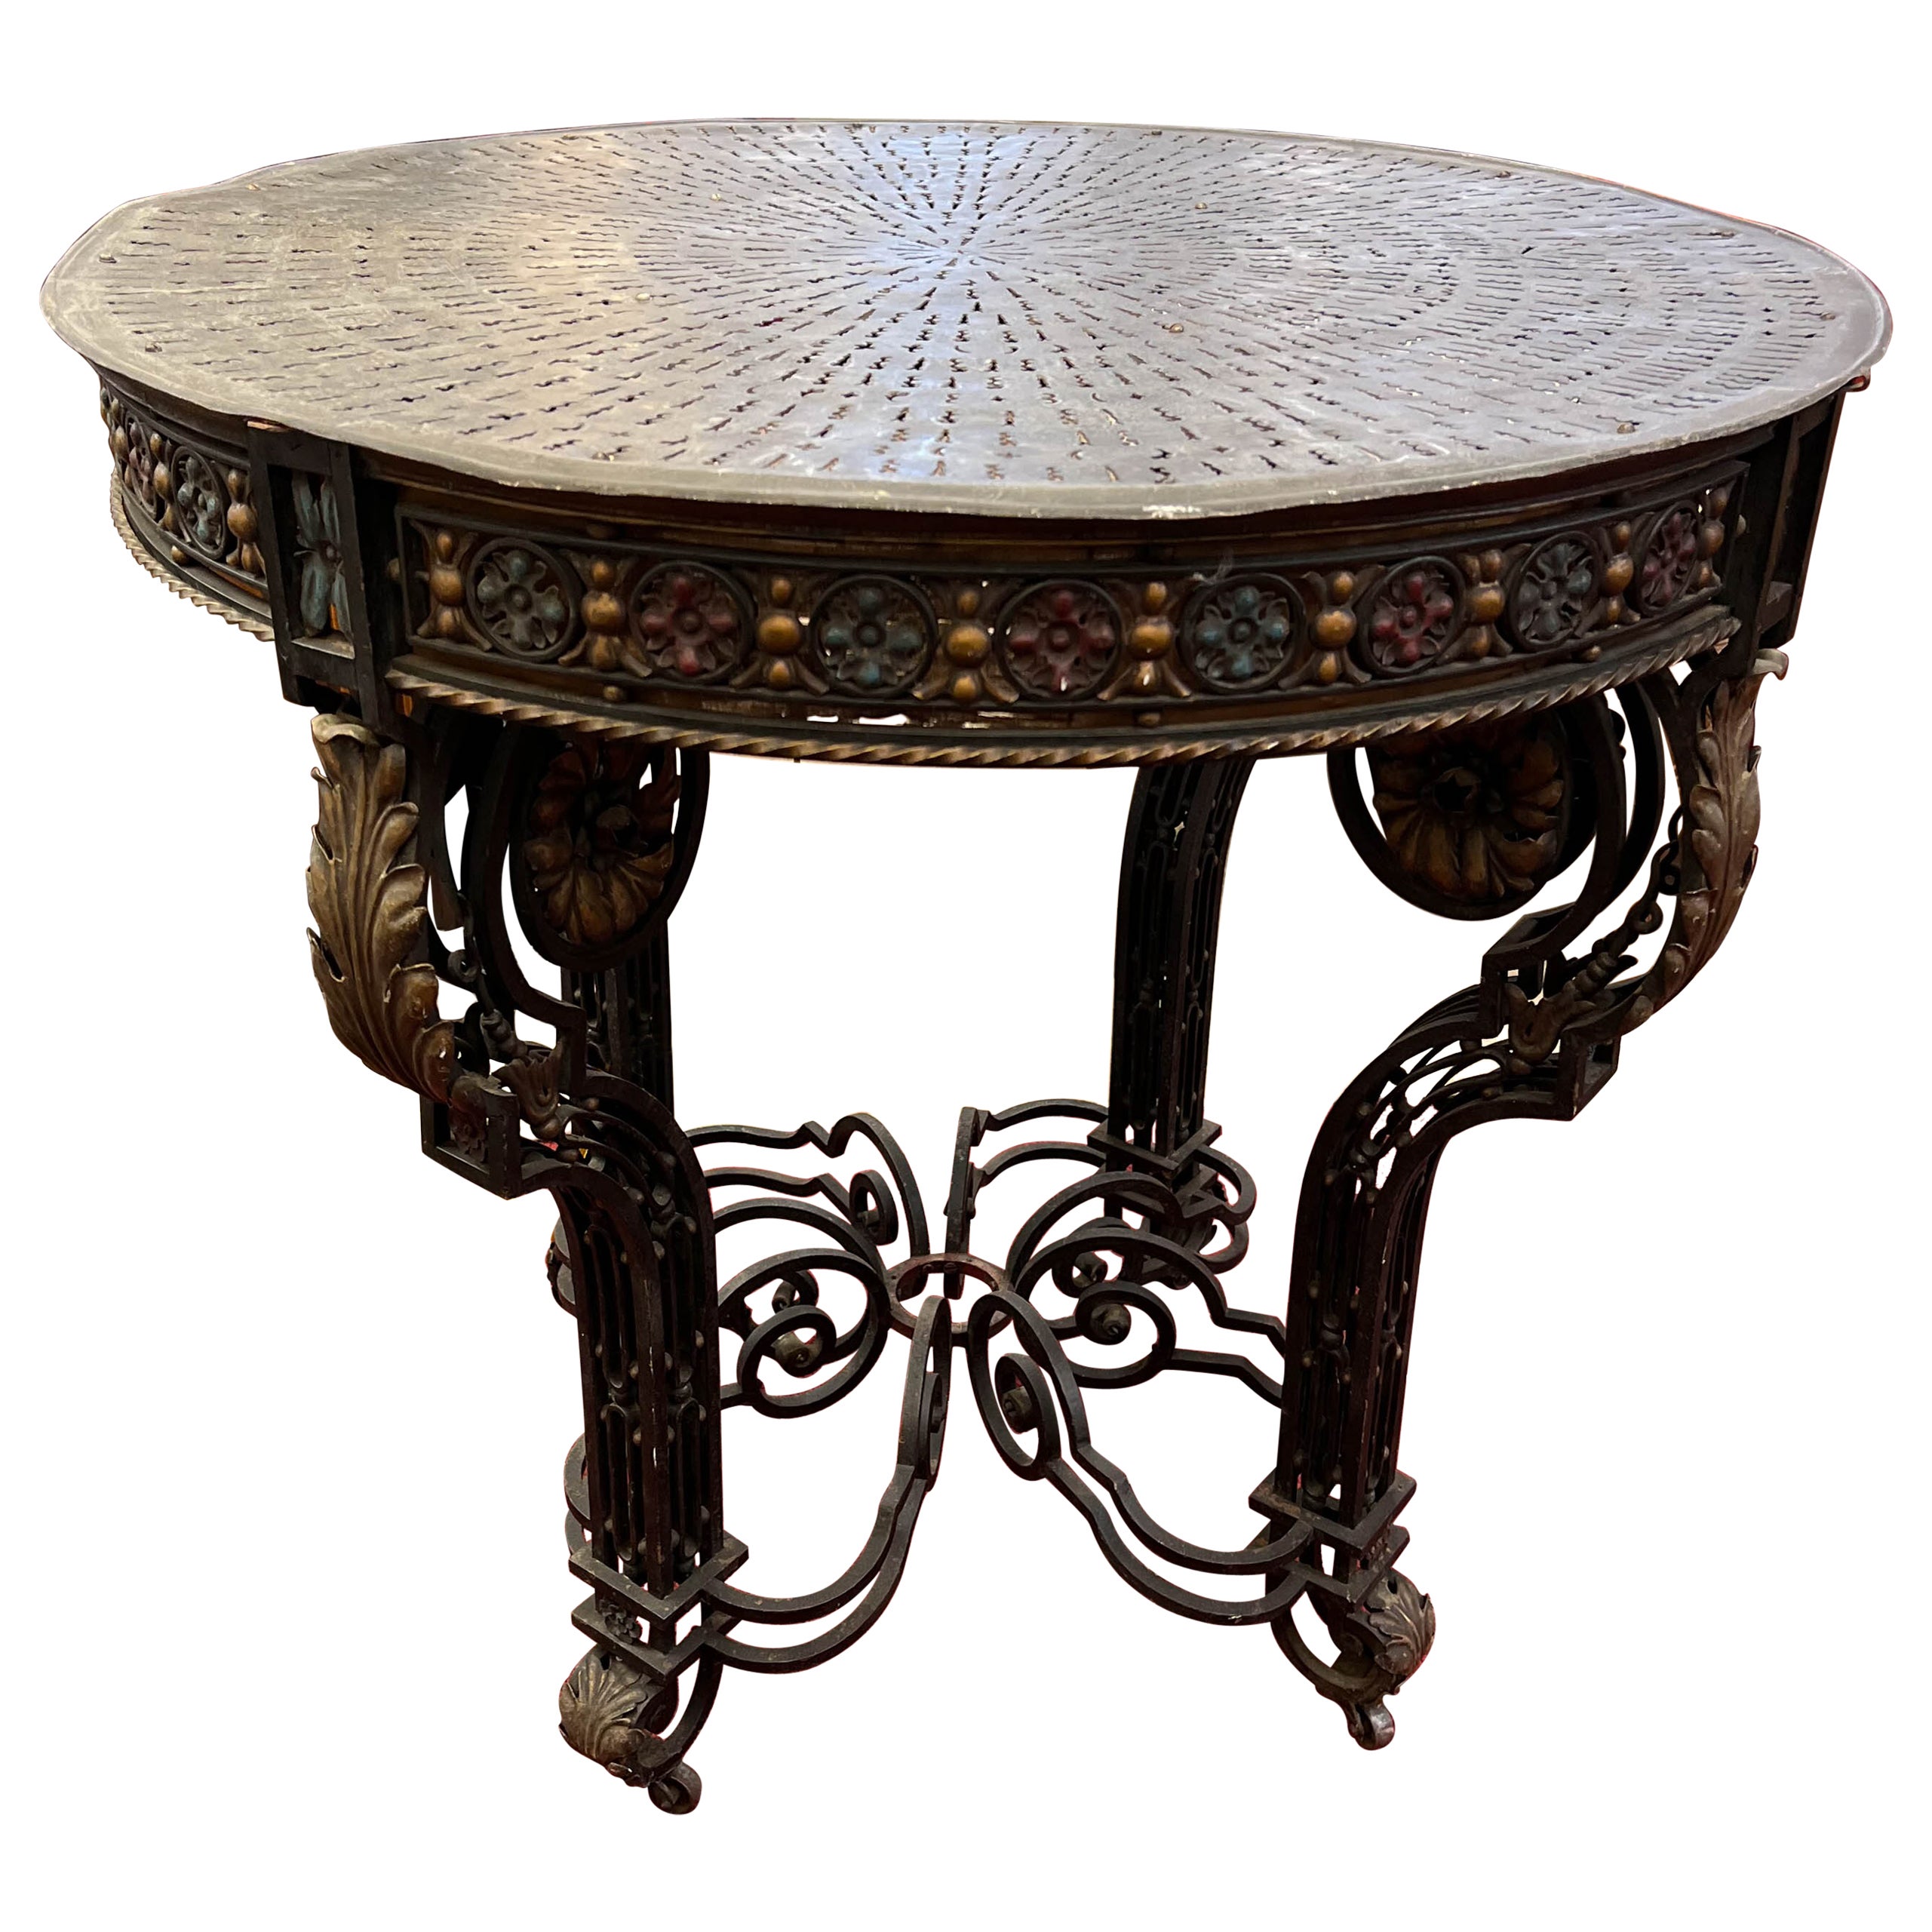 19th Century Wrought Iron 32 Inch Round Table With Built-In Light